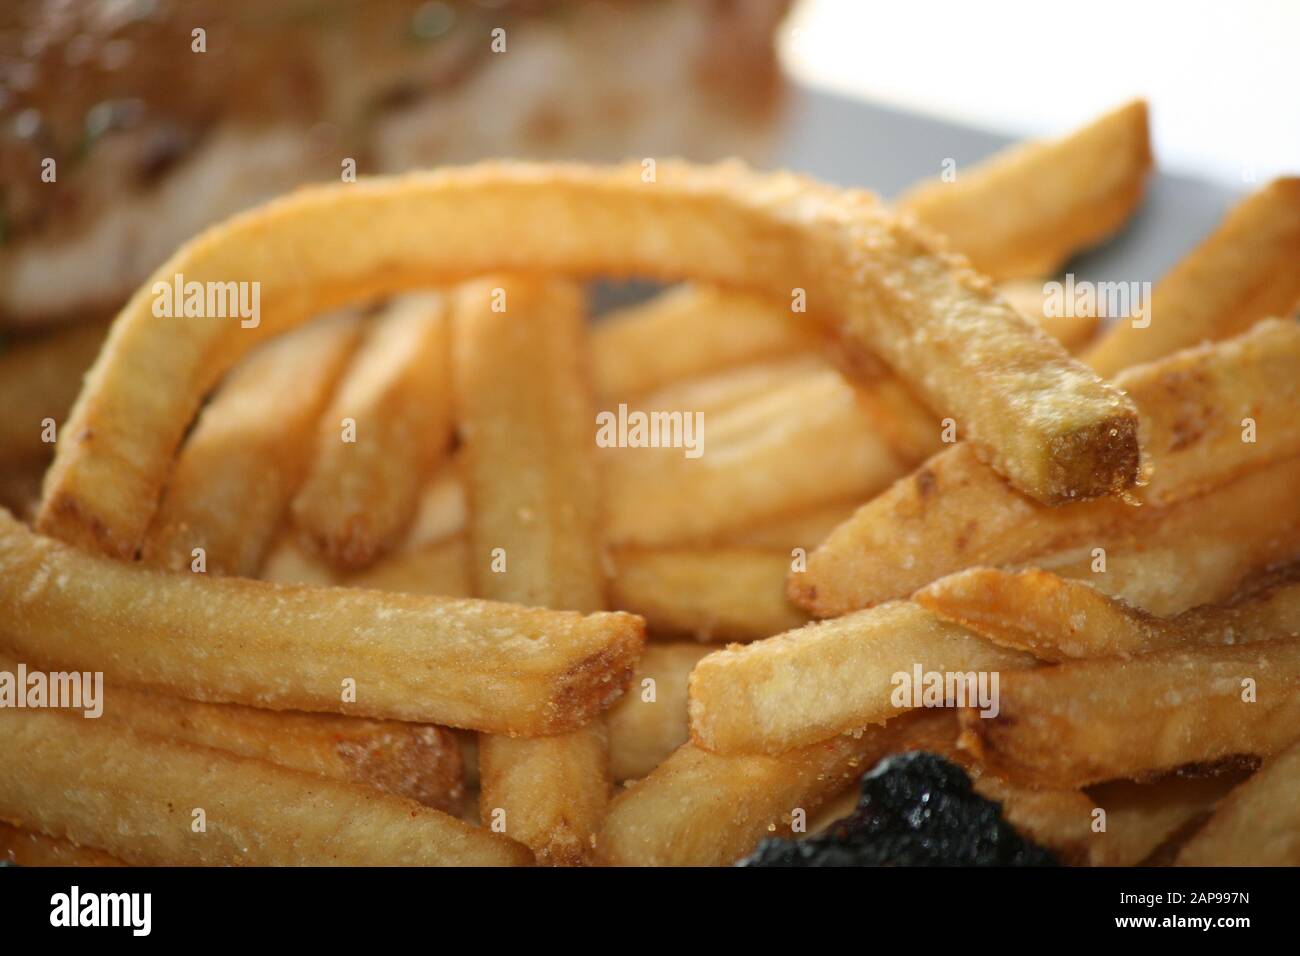 fresh potato string or straight cut french fries oven baked or deep fried as the perfect side dish at any restaurant for dine in or take out orders Stock Photo